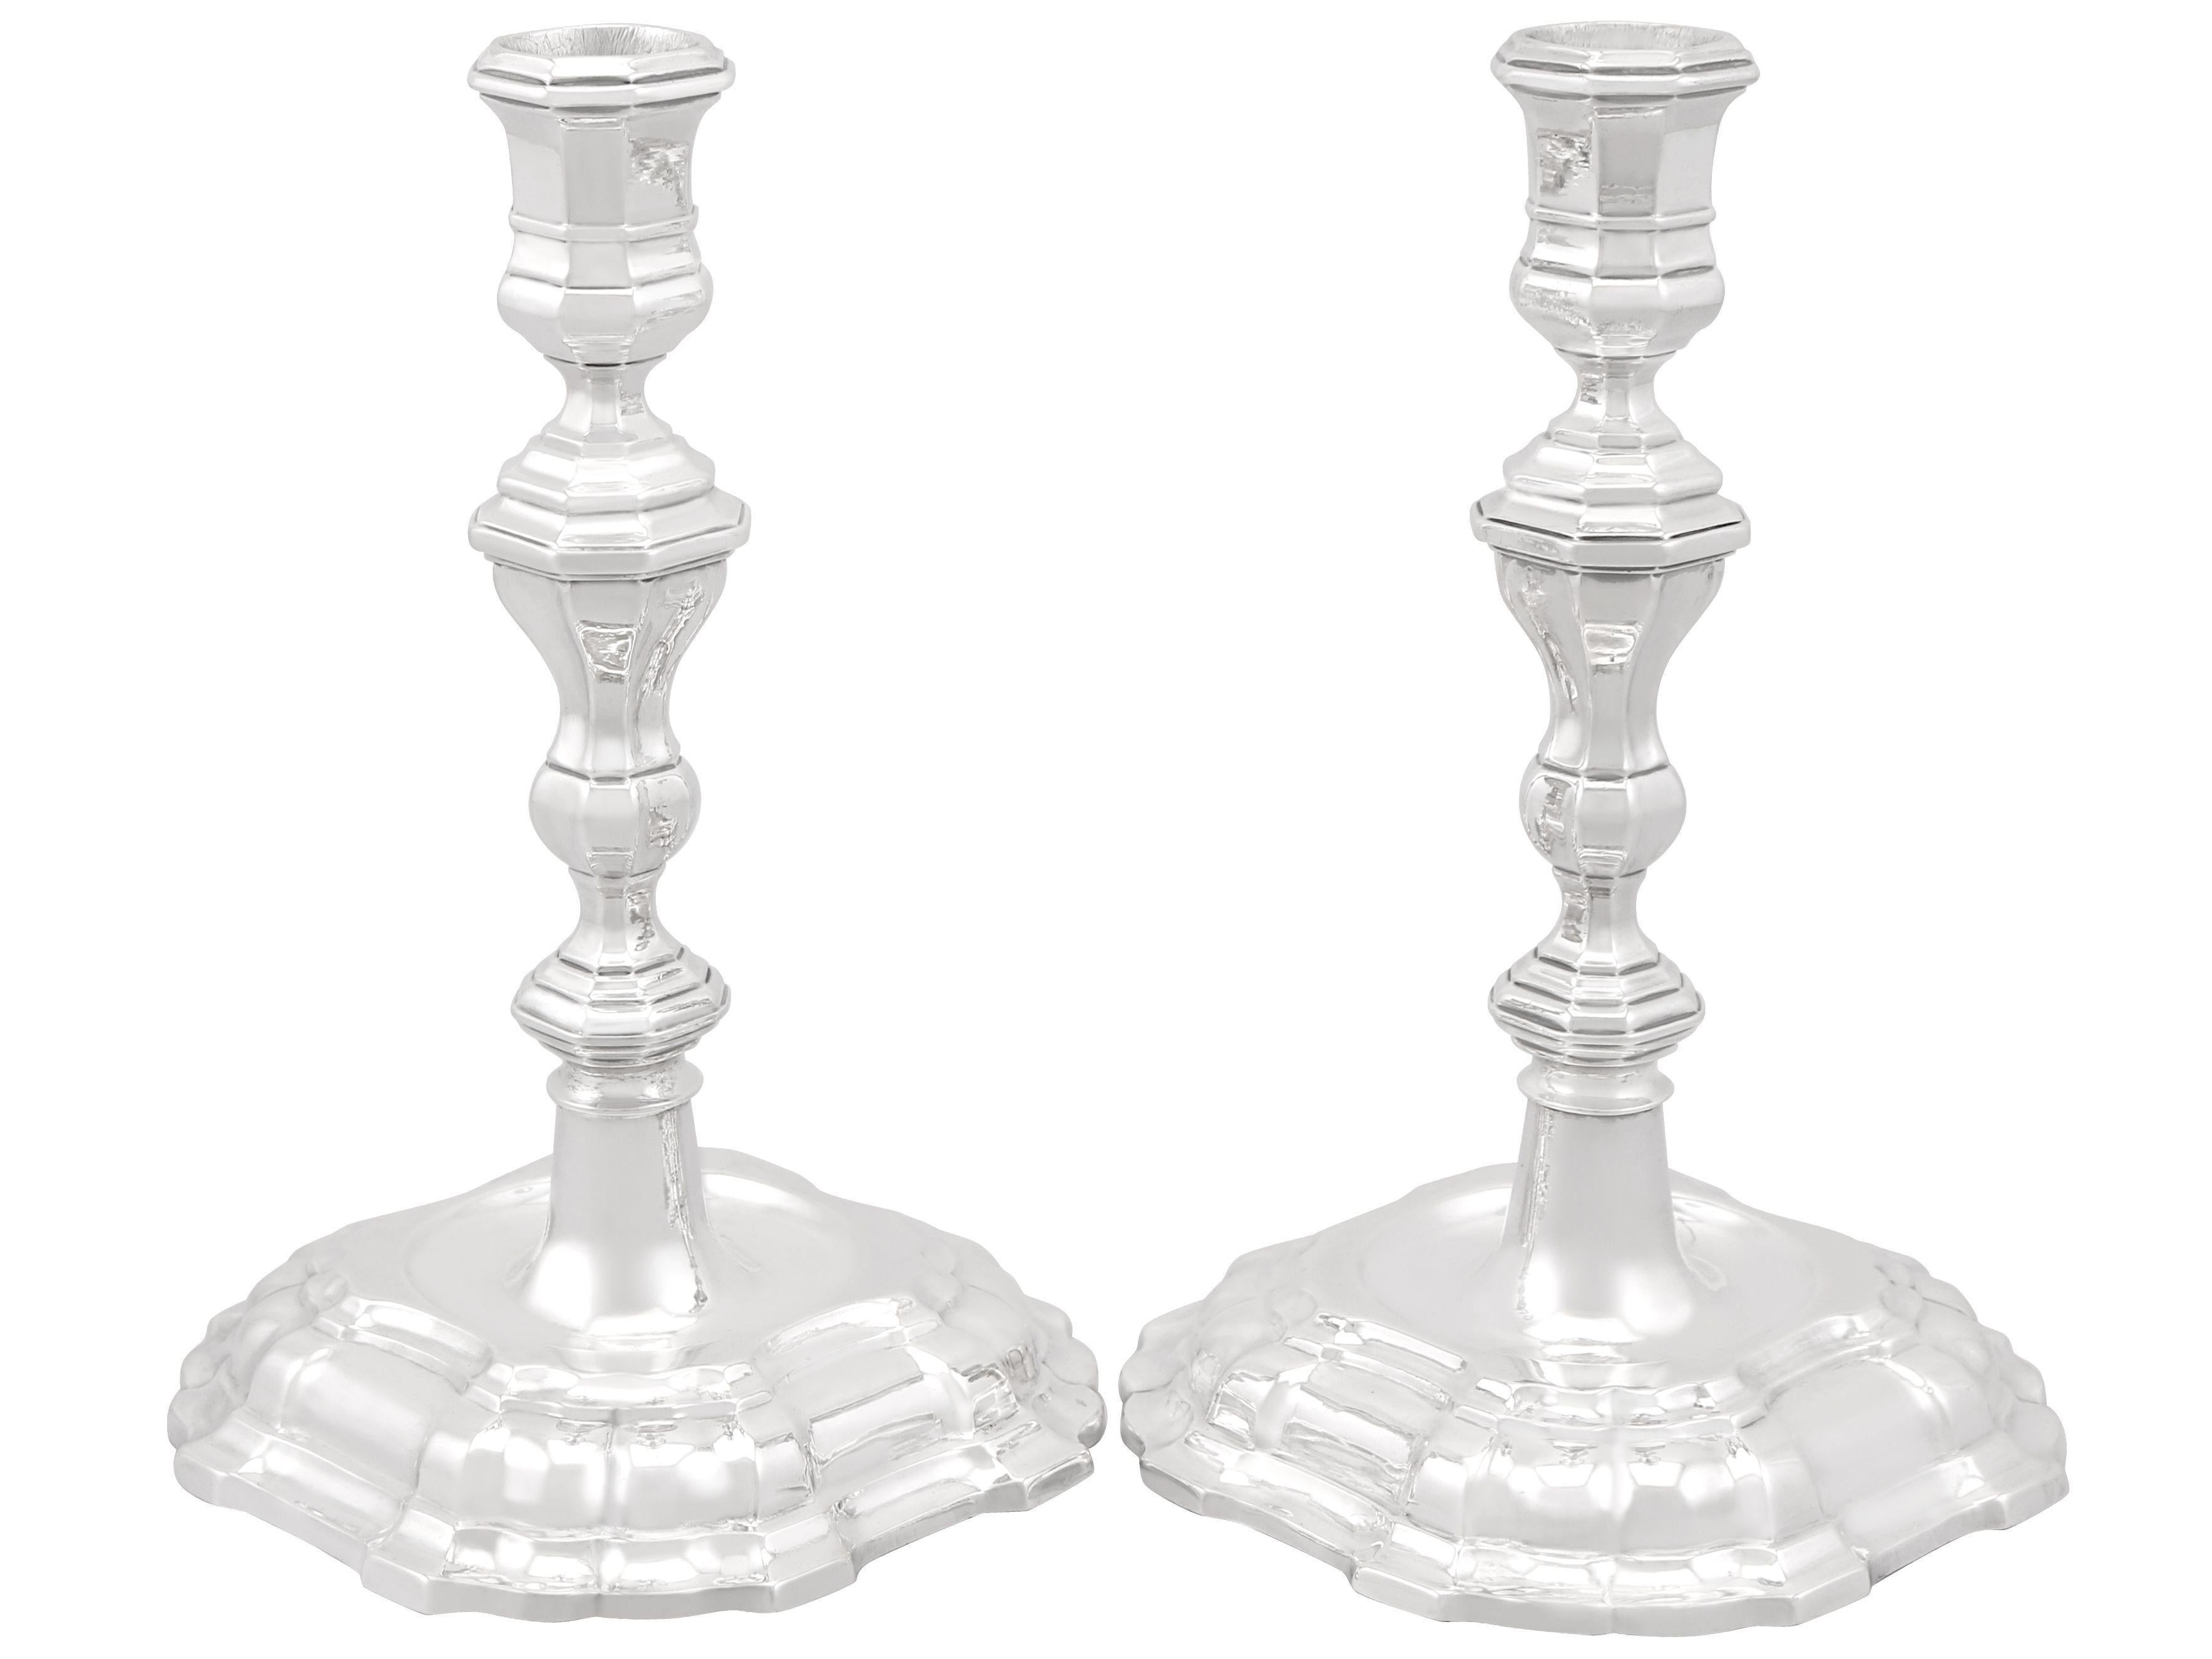 An exceptional, fine and impressive pair of antique German cast silver candlesticks; an addition to our ornamental silverware collection.

These impressive antique German cast silver candlesticks have a panelled, shaped form.

The plain faceted